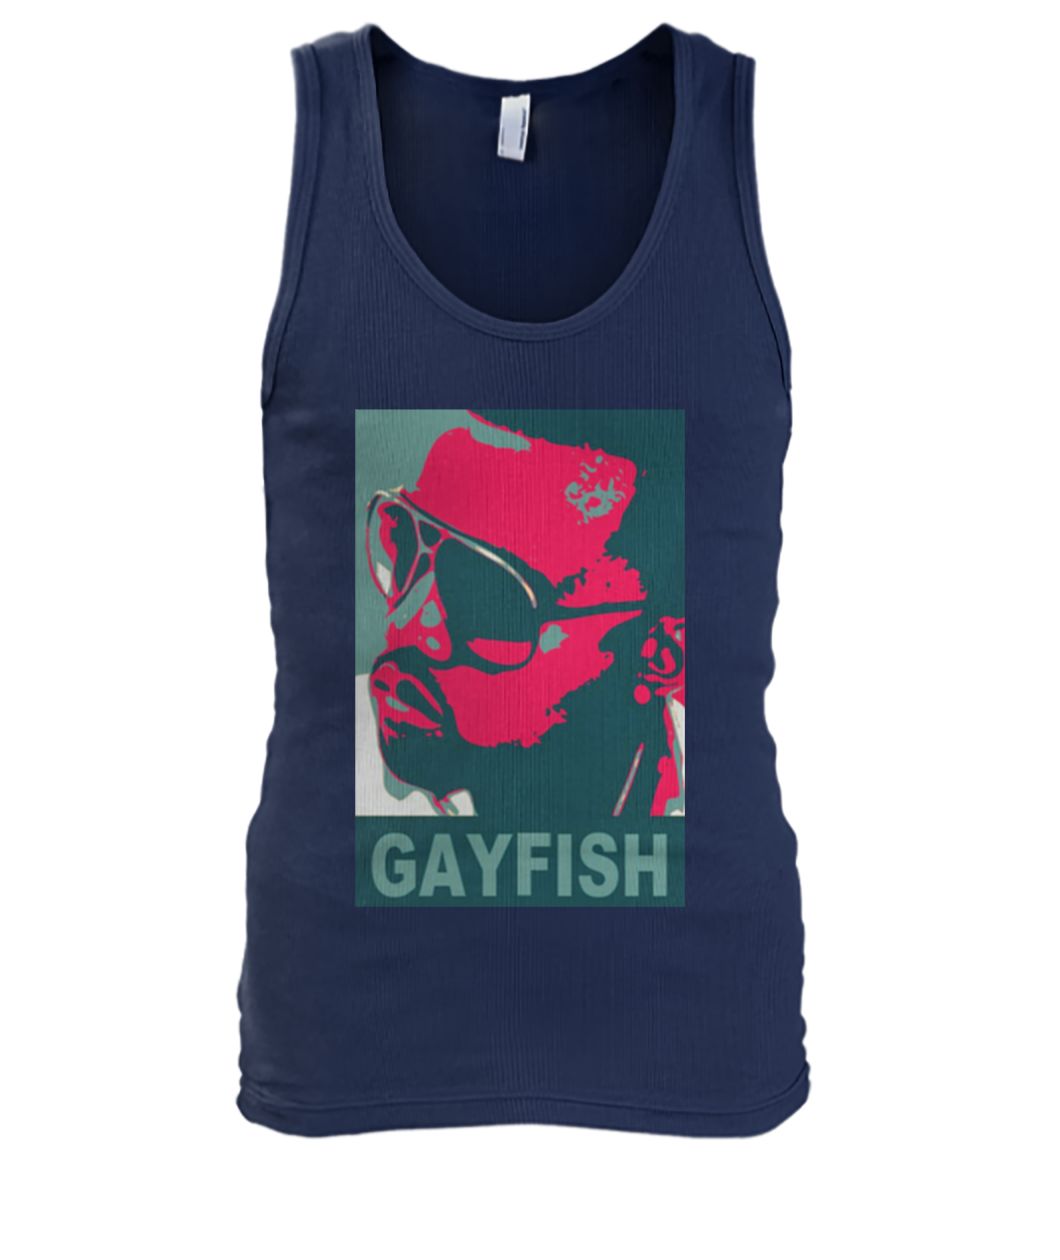 South park kanye west is a gay fish men's tank top